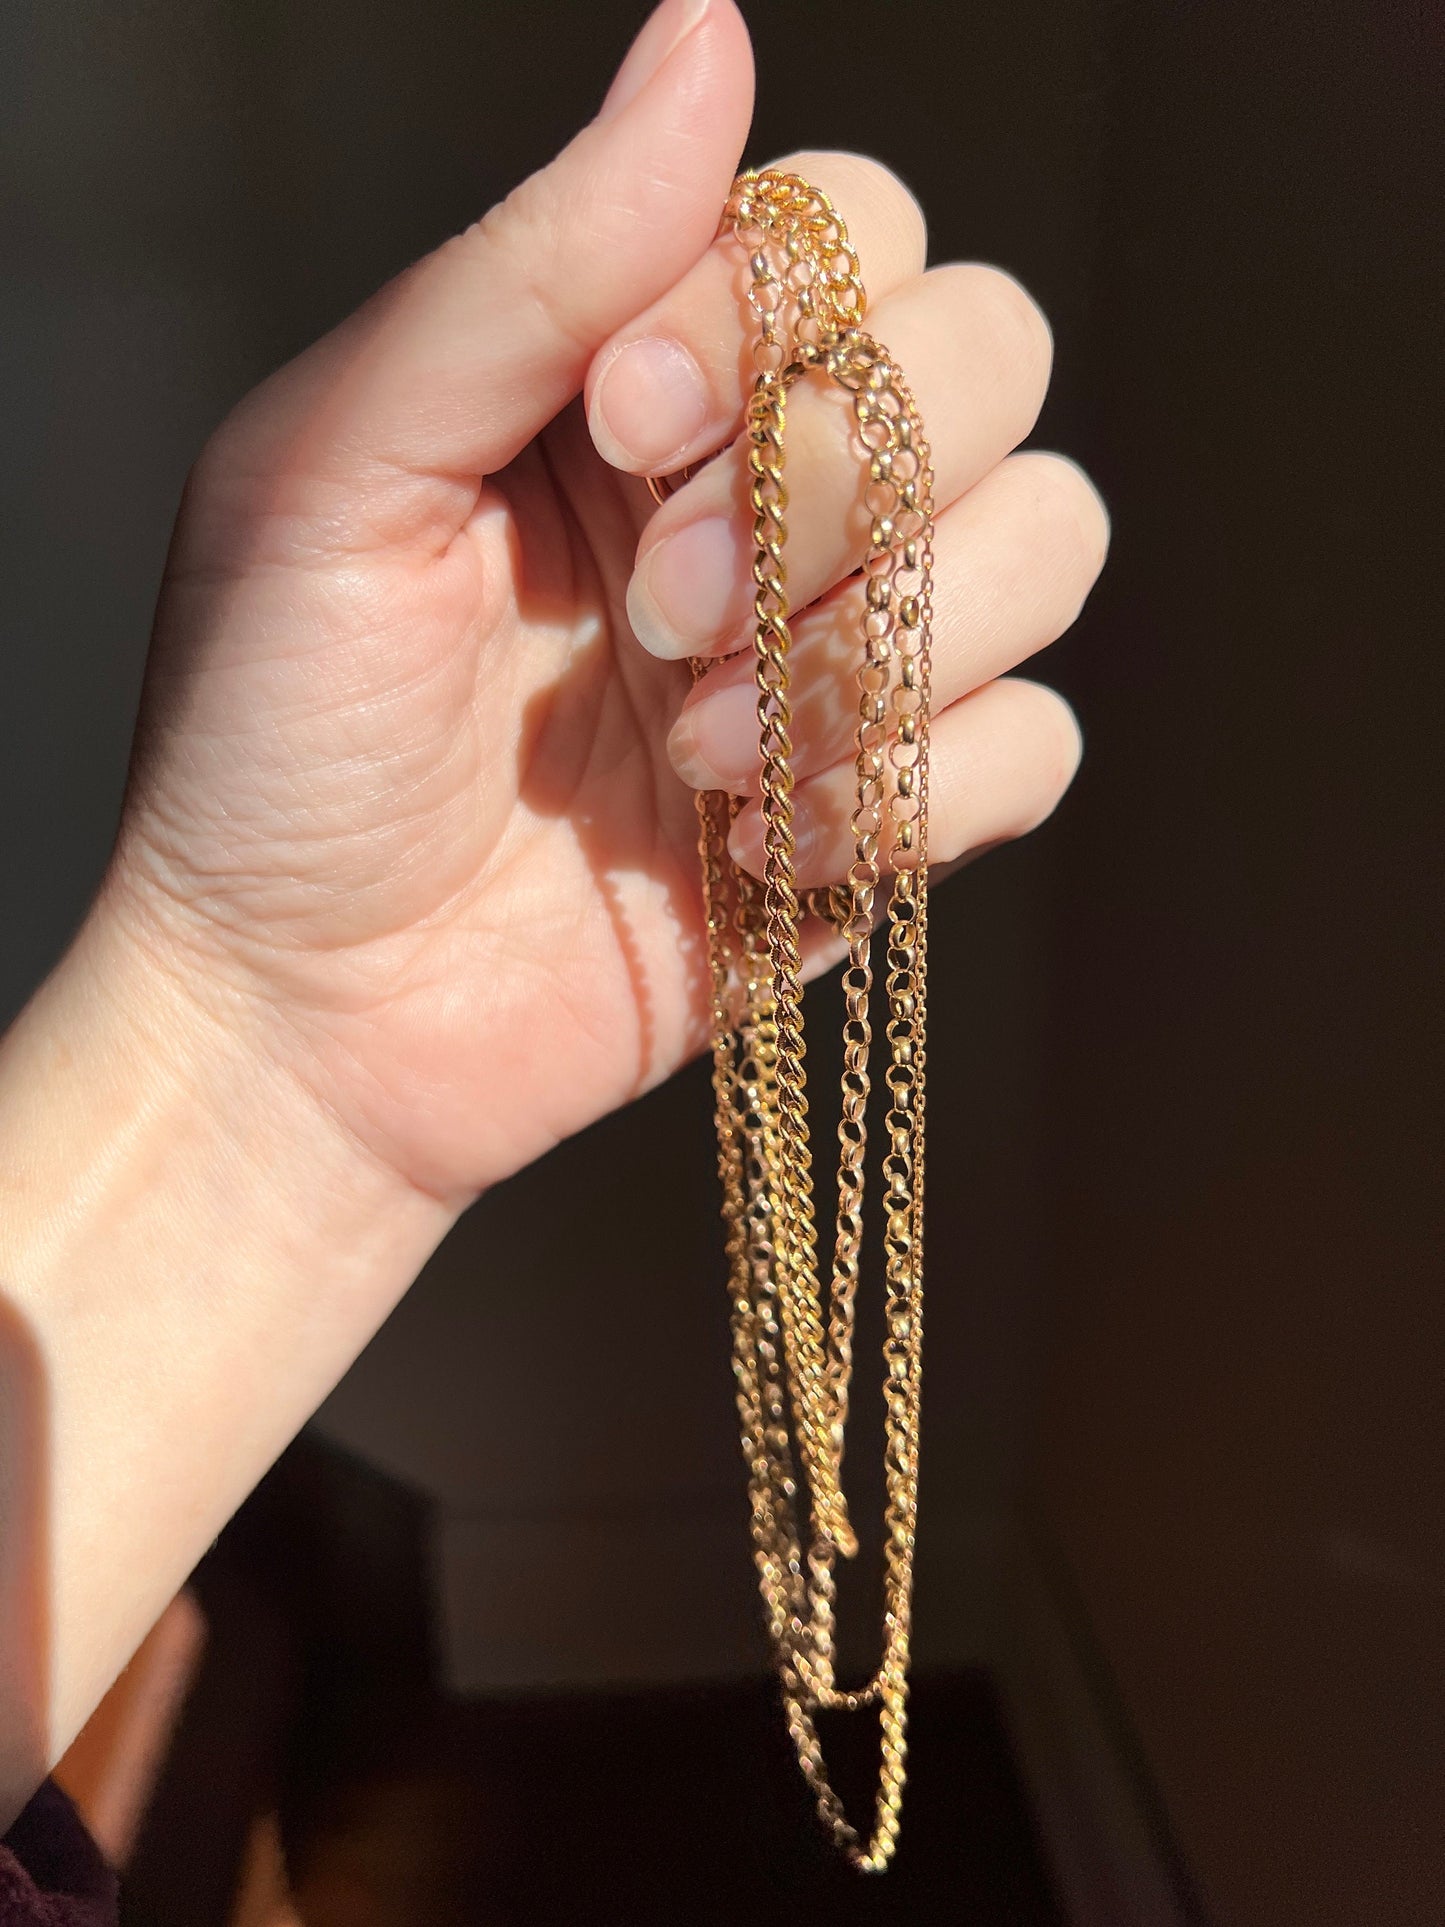 ANTIQUE 14k Gold CHAIN Necklace GEORGIAN to Early Victorian Era Rolo Link Solid Neckmess Neckstack Layering Pendant Holder Romantic Gift